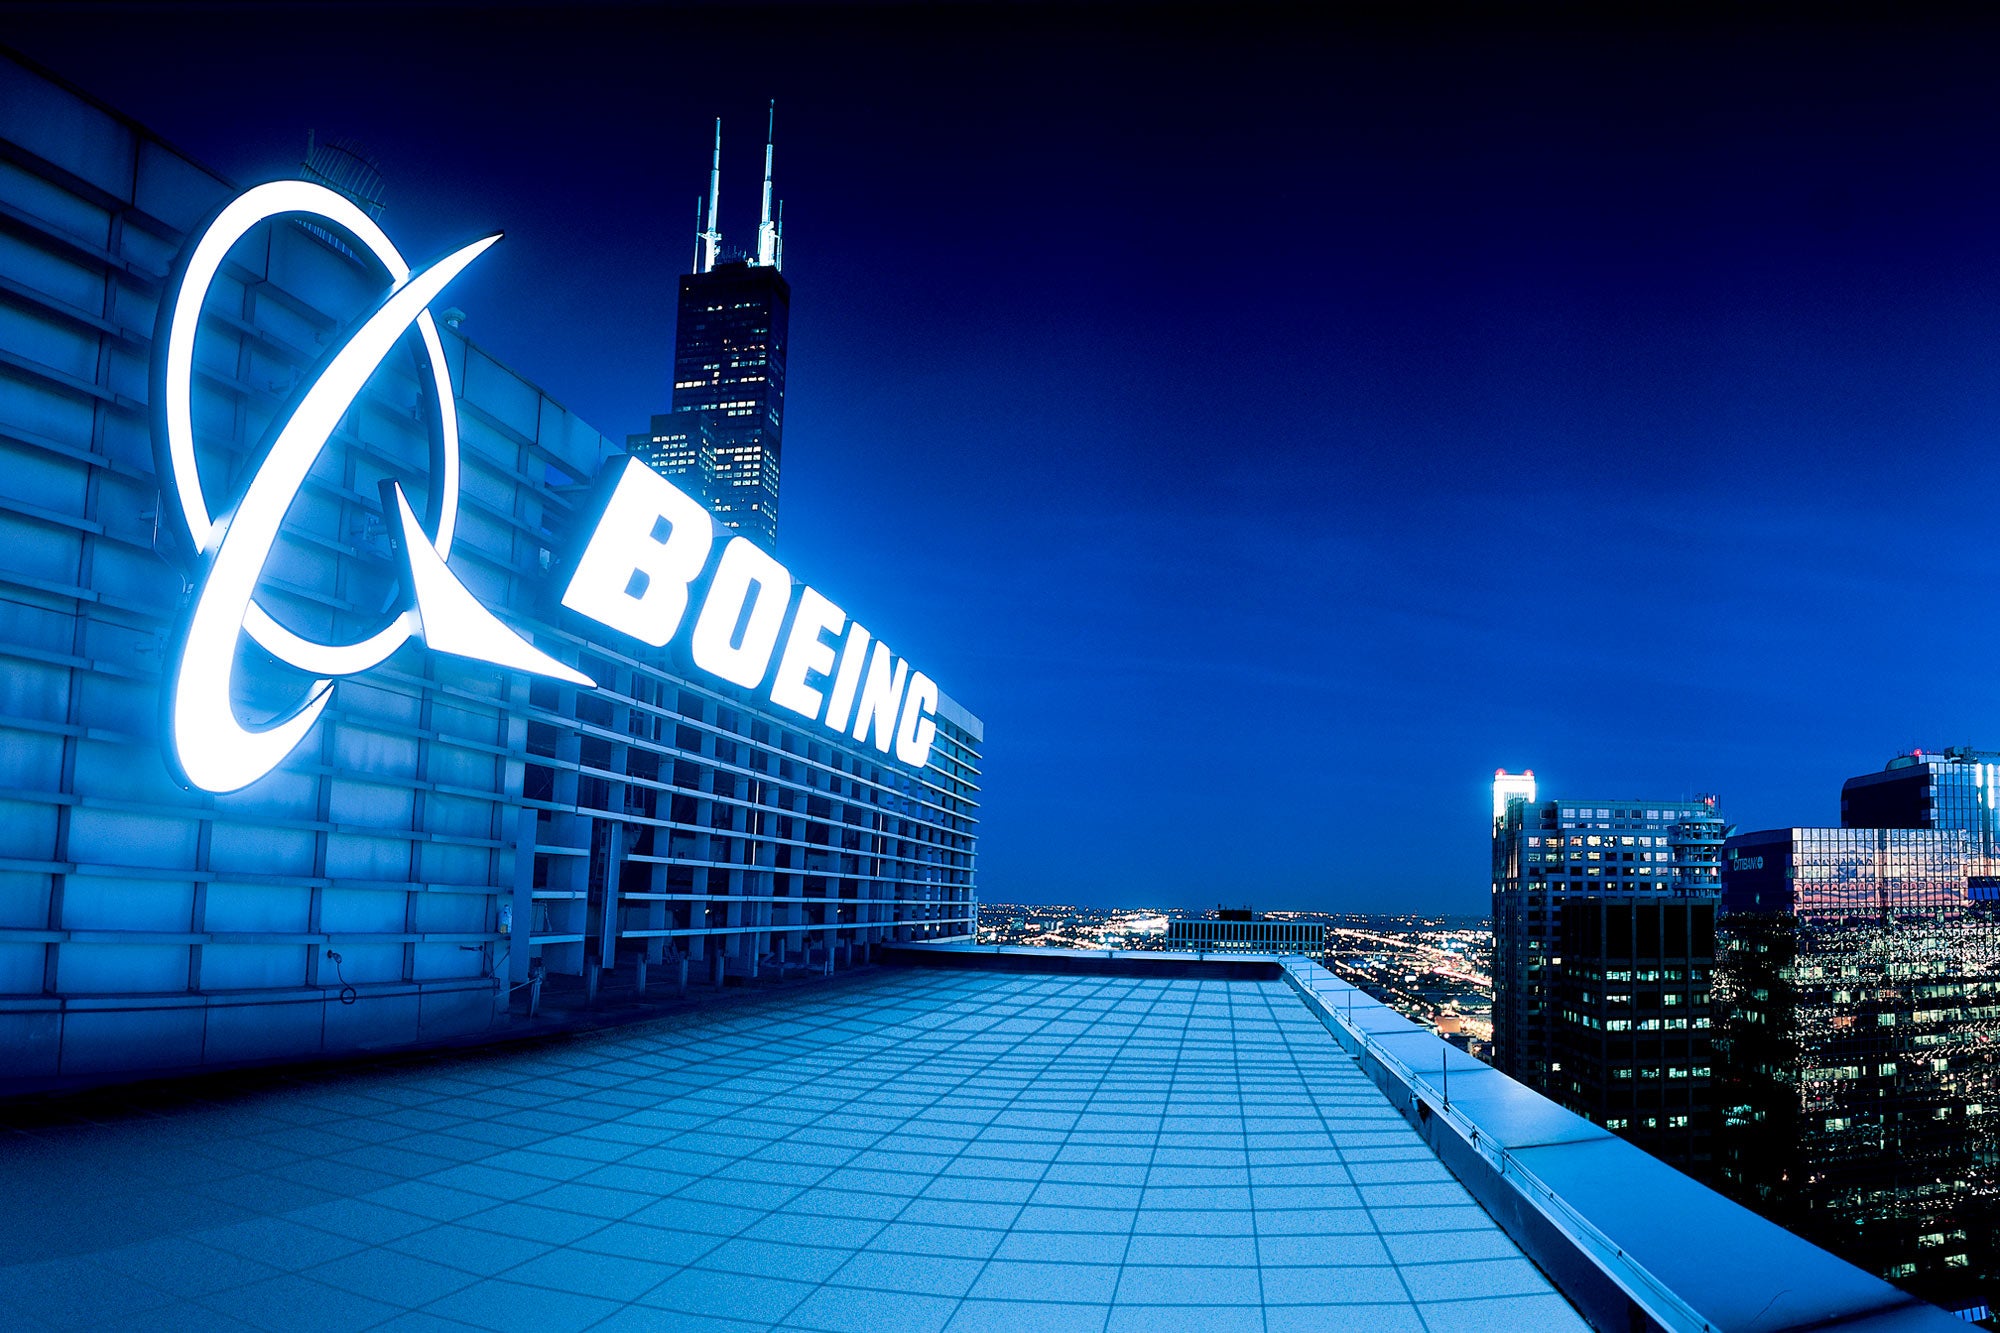 Boeing Advances Plans To Transition To Digital Ecosystem